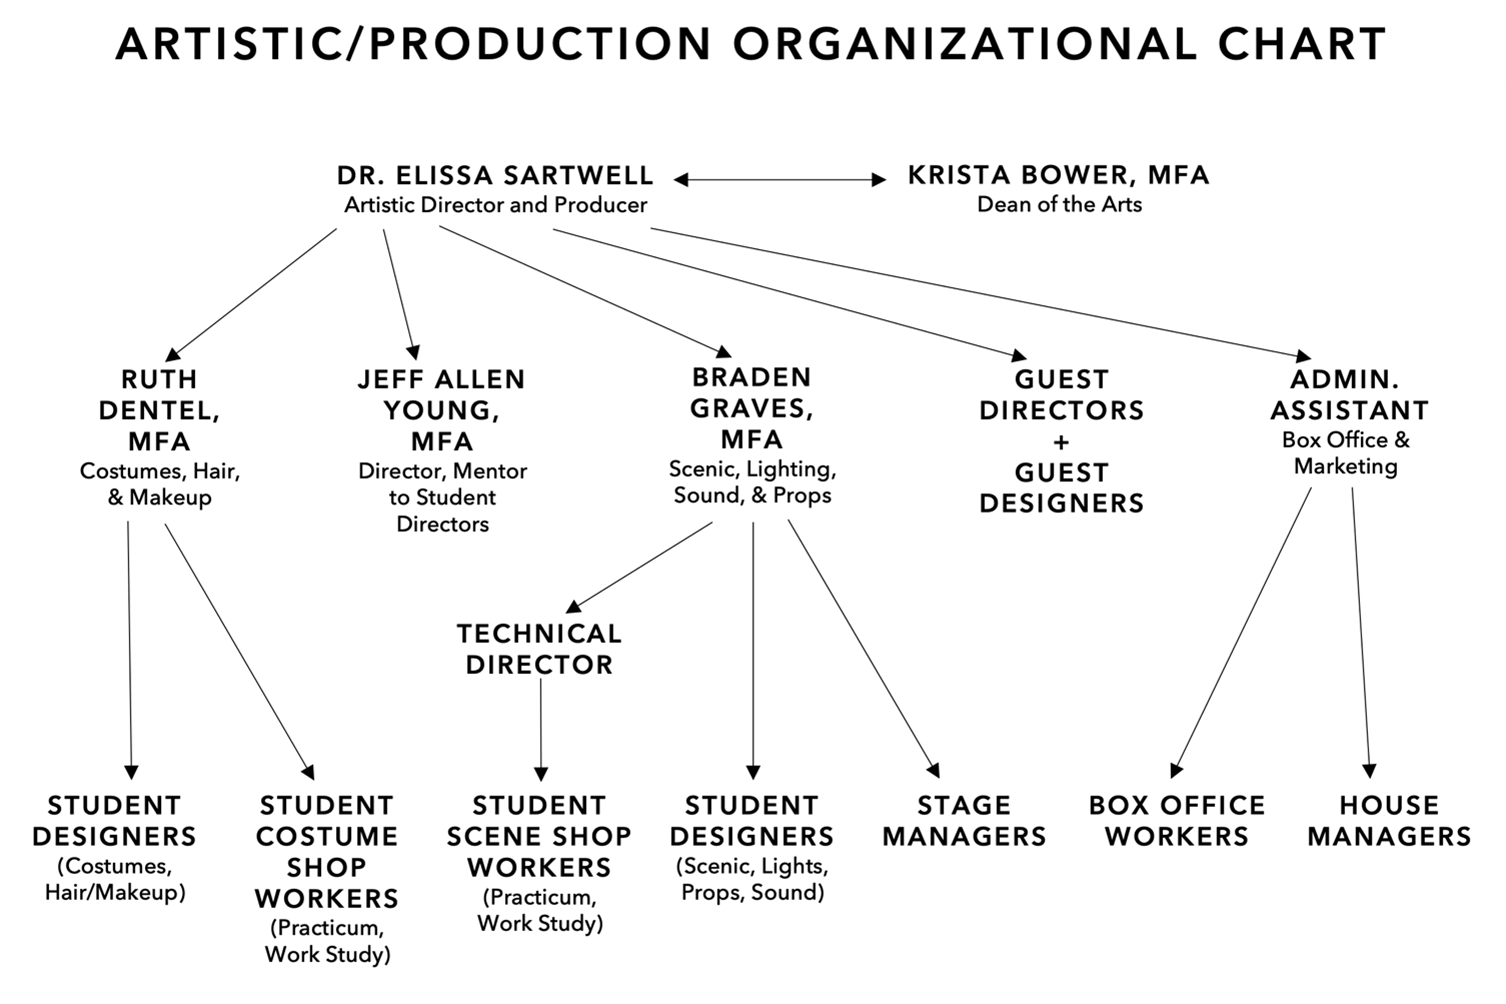 Organizational chart of the Theatre Artistic/Production department. Highlights from the chart: Dr. Elissa Sartwell = Artistic Director and Producer. Krista Bower = Dean of the Arts. Ruth Dentel = Costumes, Hair, and Makeup. Jeff Allen Young = Director, Mentor to Student Directors. Braden Graves = Scenic, Lighting, Sound, and Props.